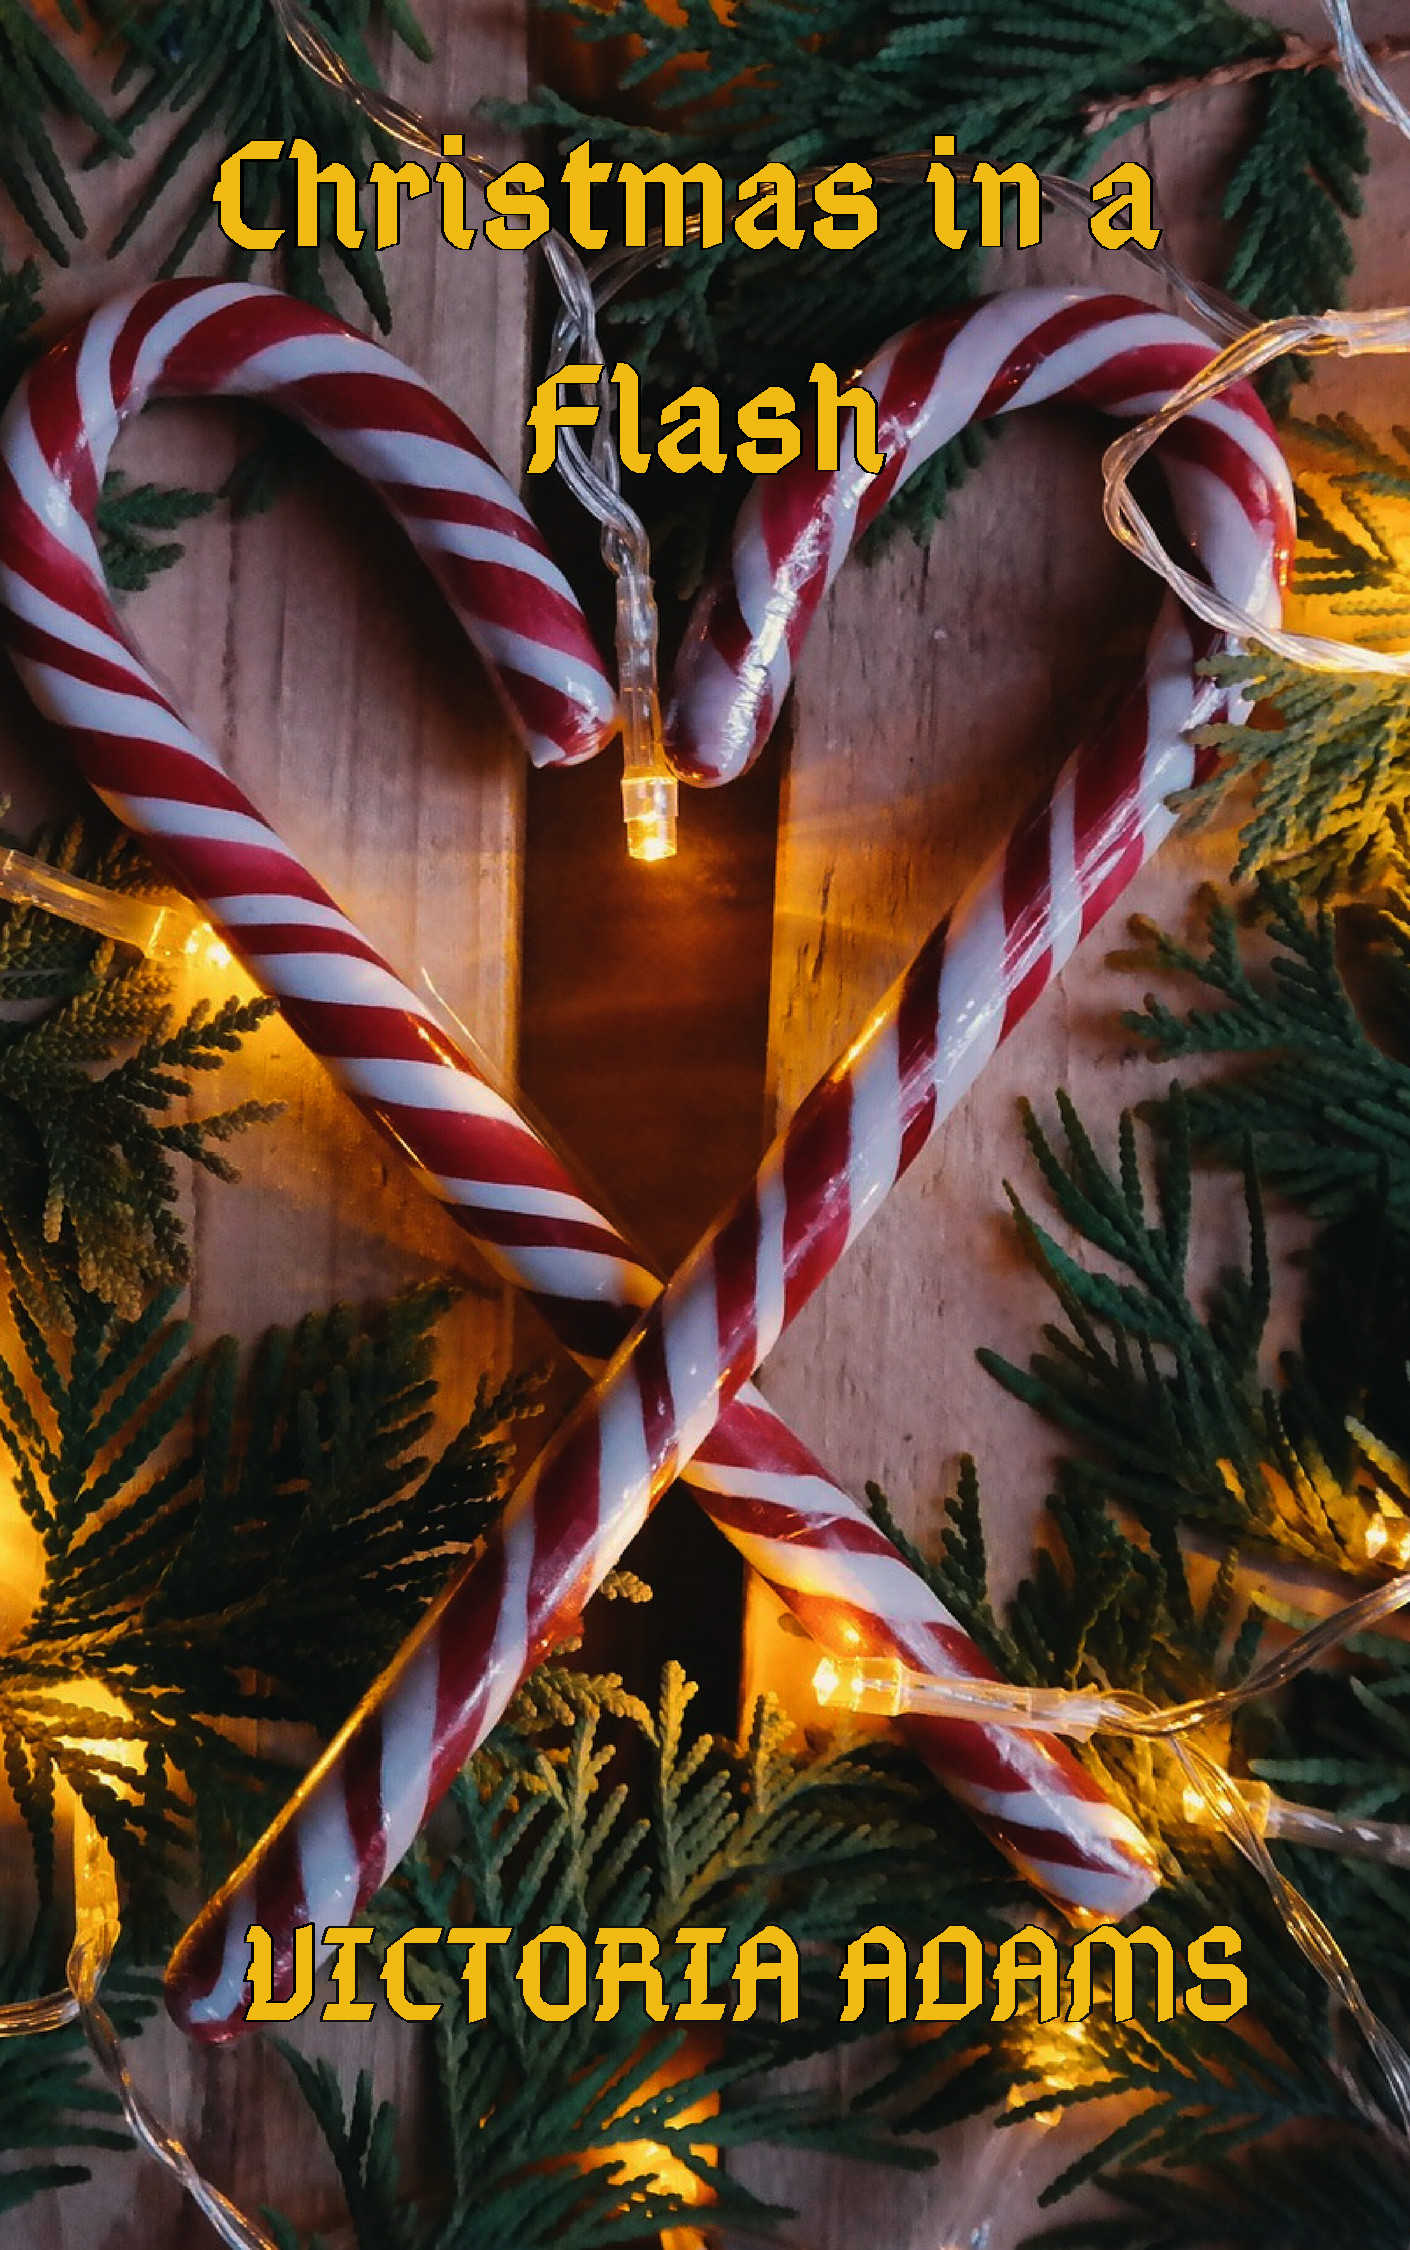 __Christmas in a flash